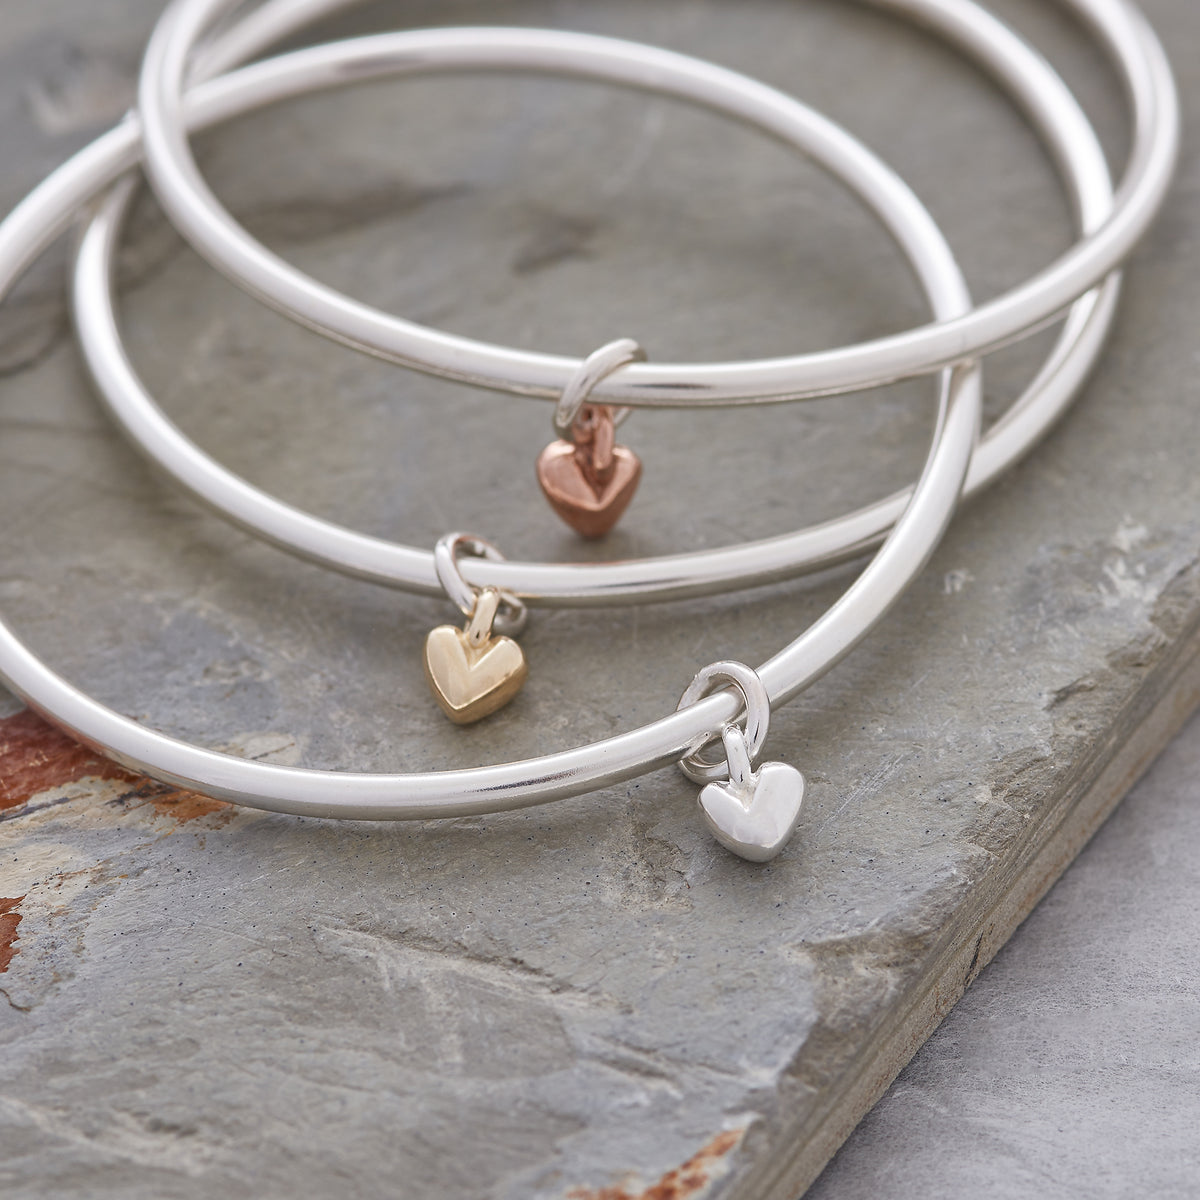 unique silver &amp; gold heart charm bangles made in the UK from recycled silver